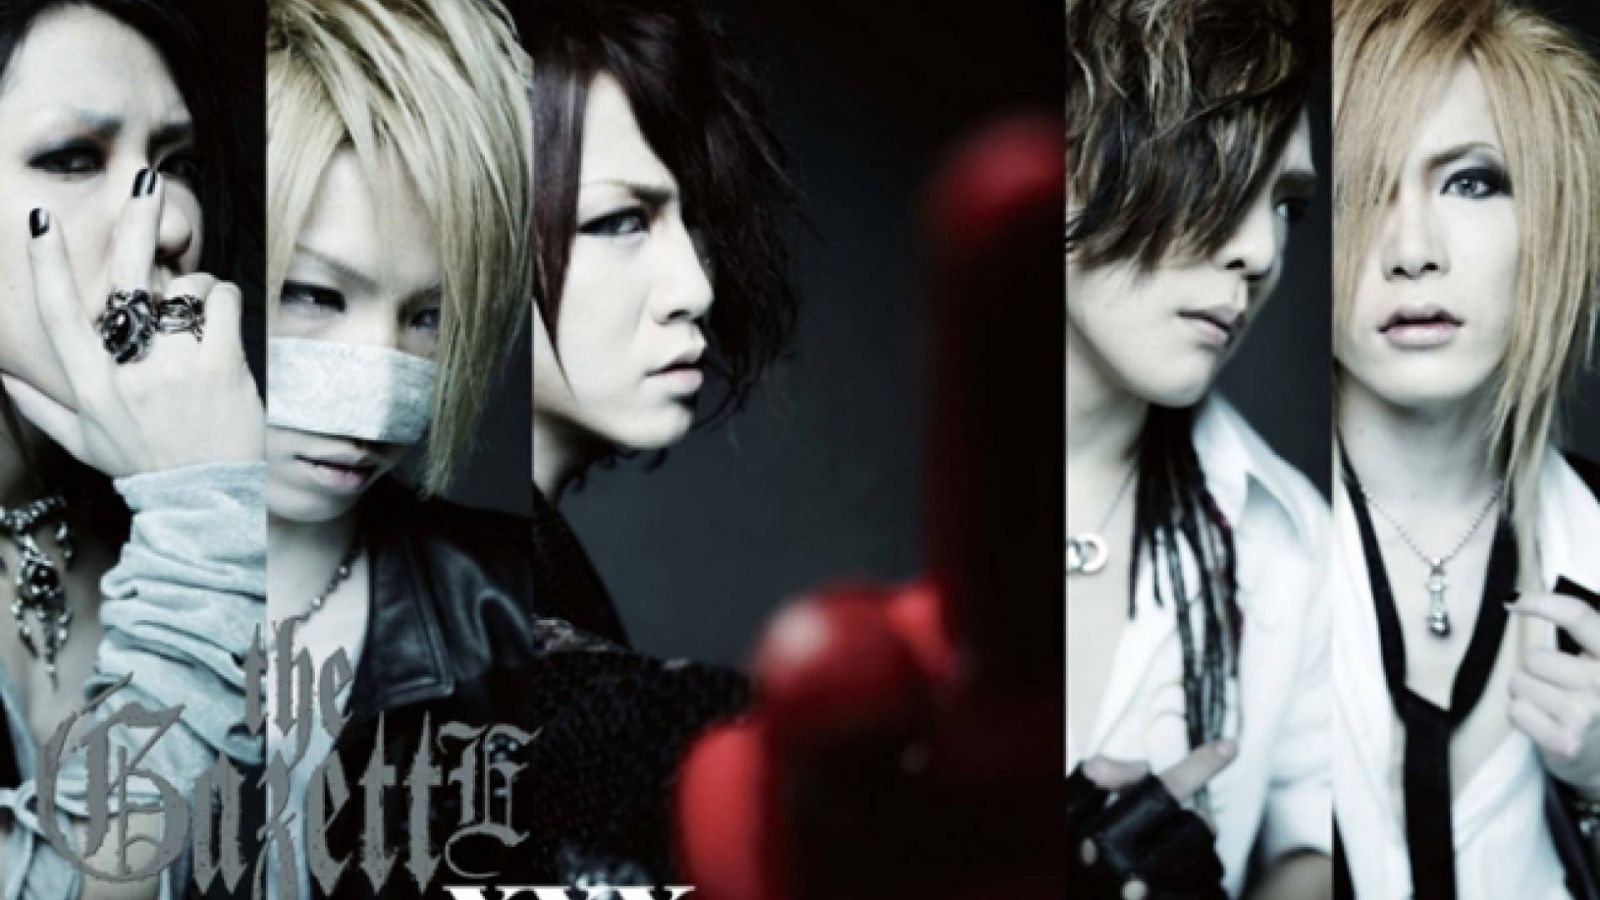 the GazettE To Perform at Tokyo Dome © 2009 Zy.connection Inc. All Rights Reserved.